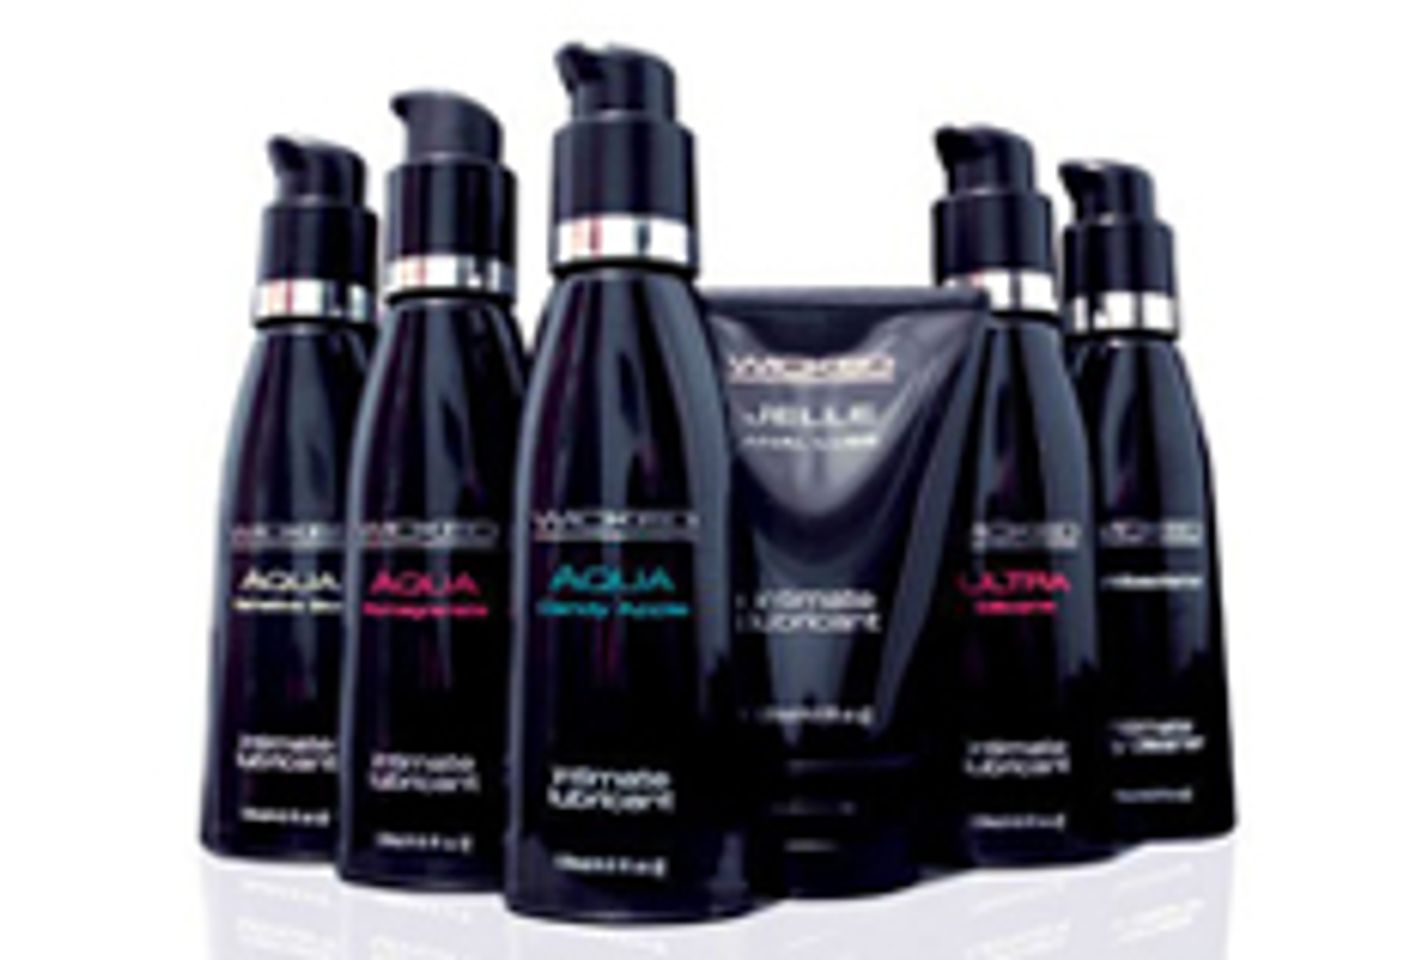 Wicked Sensual Care Finds 2 New European Distributors